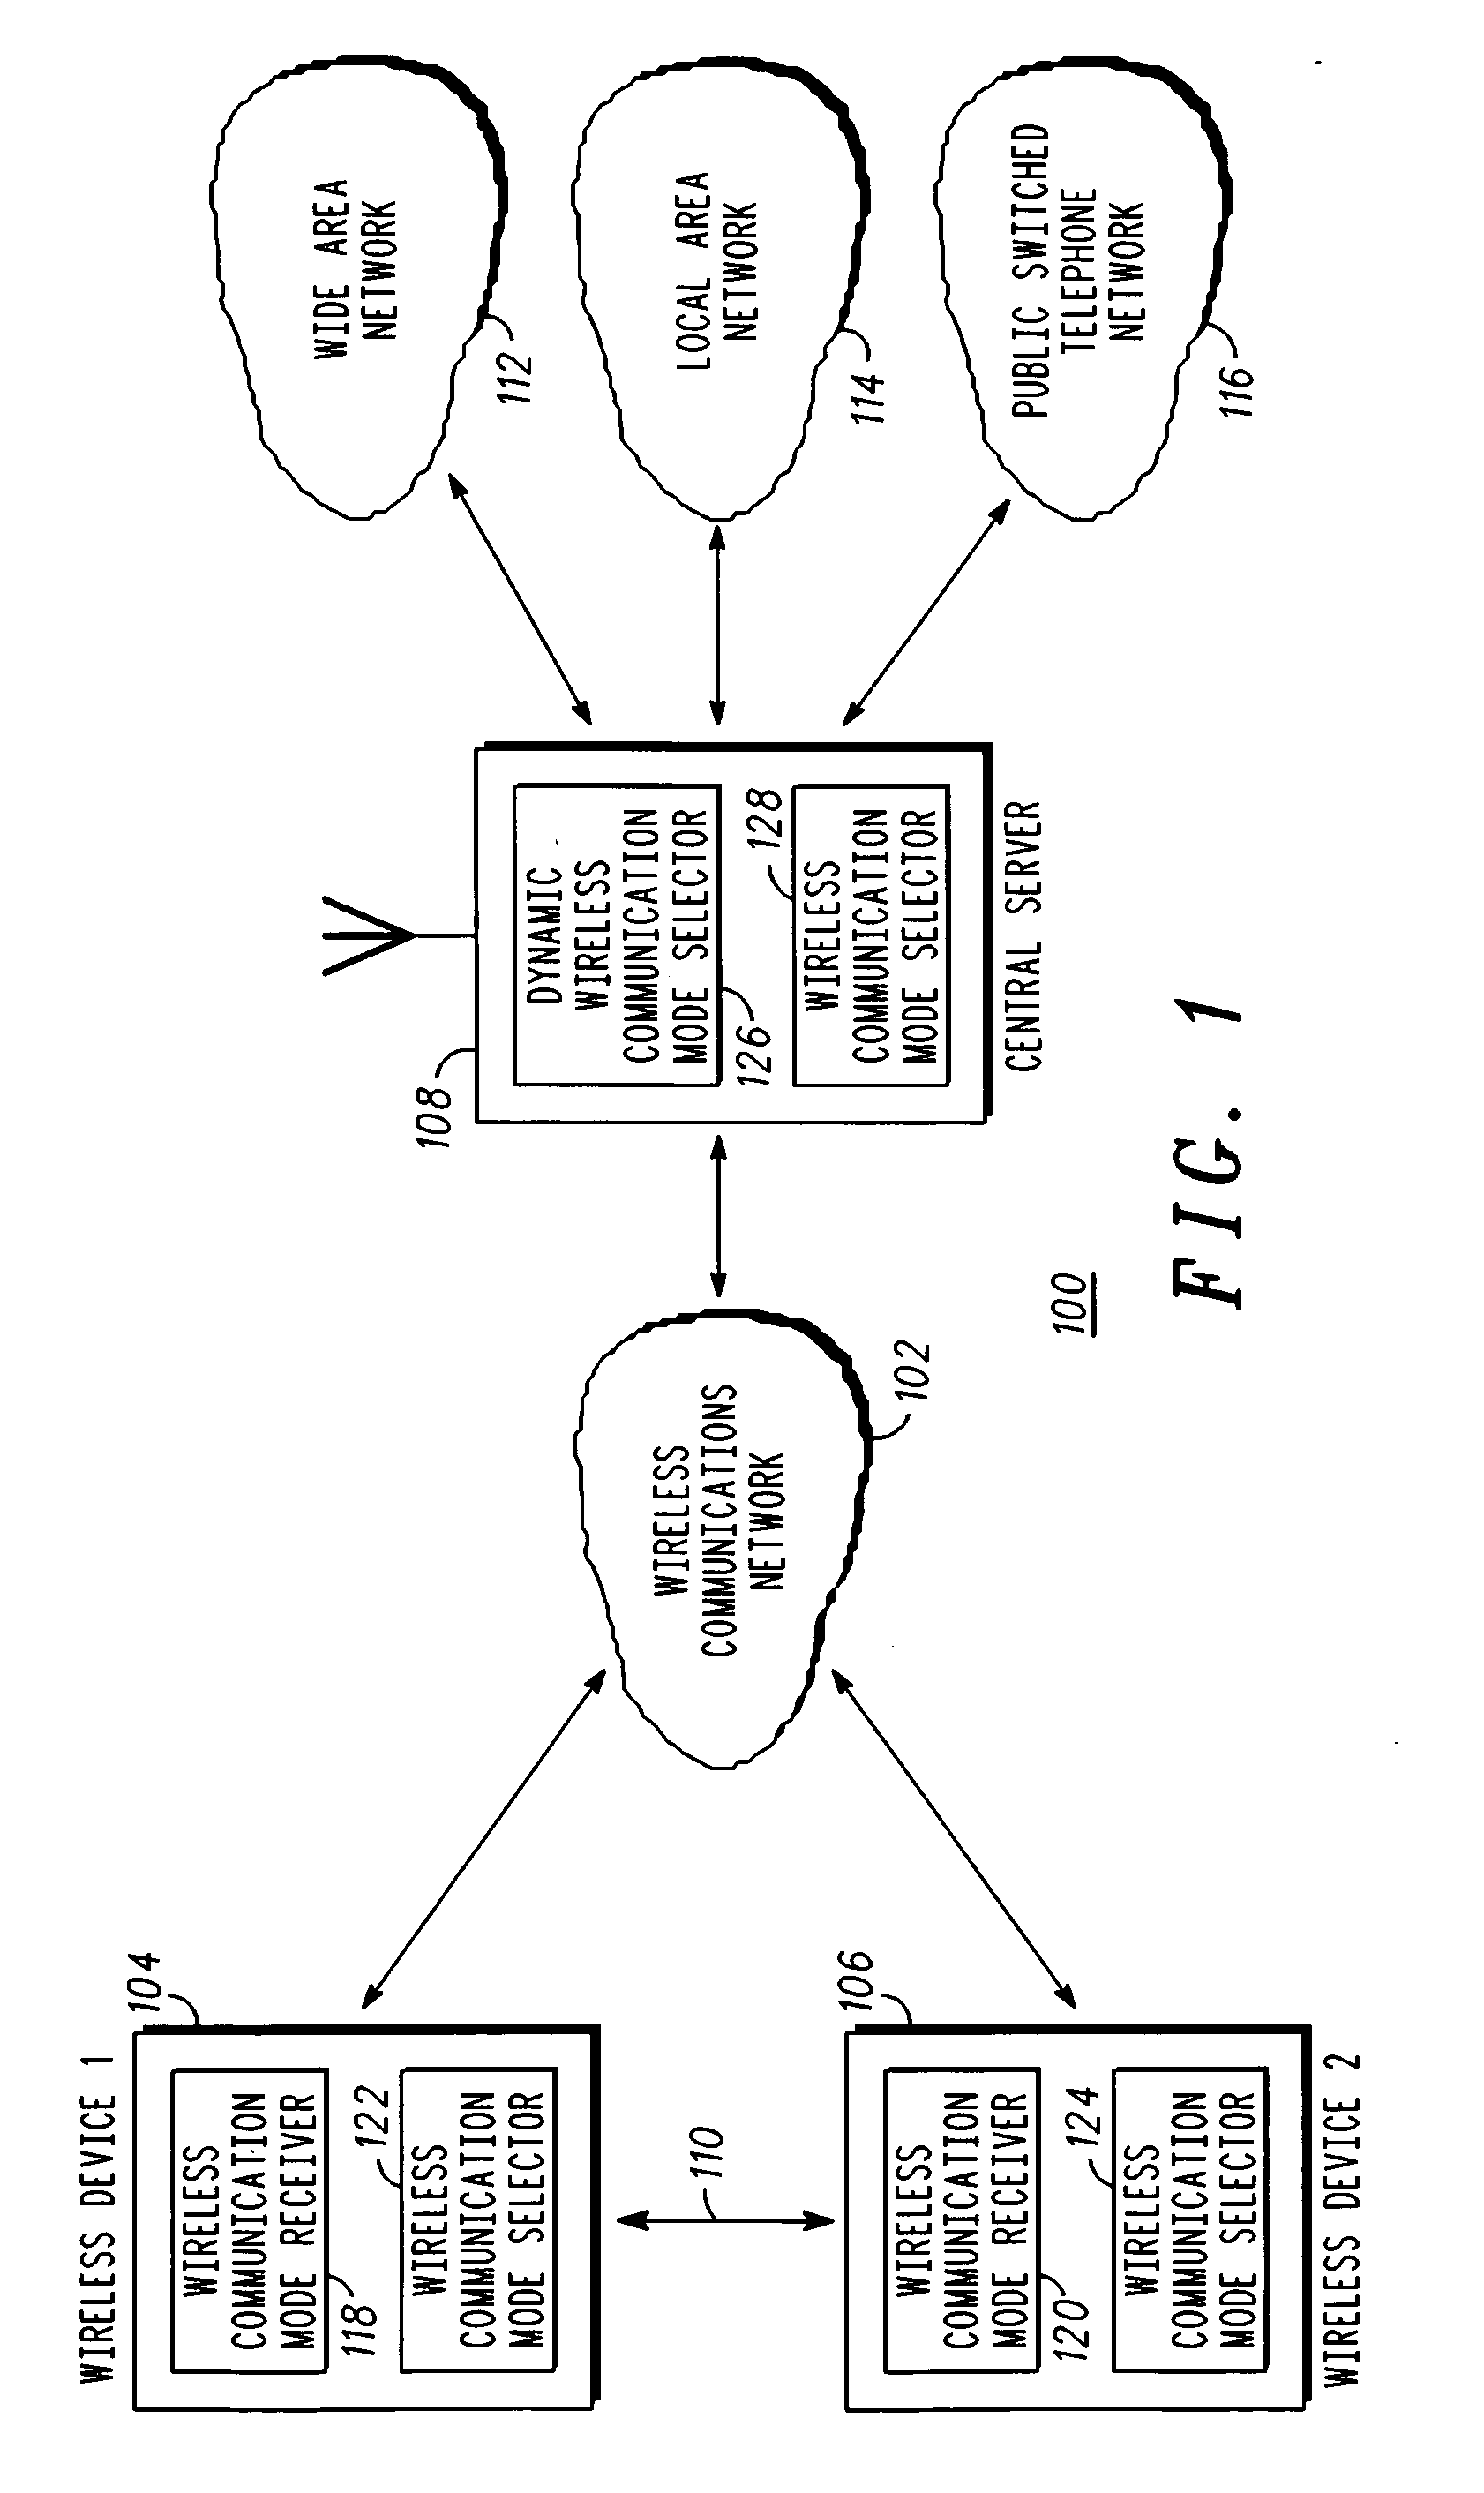 System and method for dynamically selecting wireless information communication modes for a wireless communication device